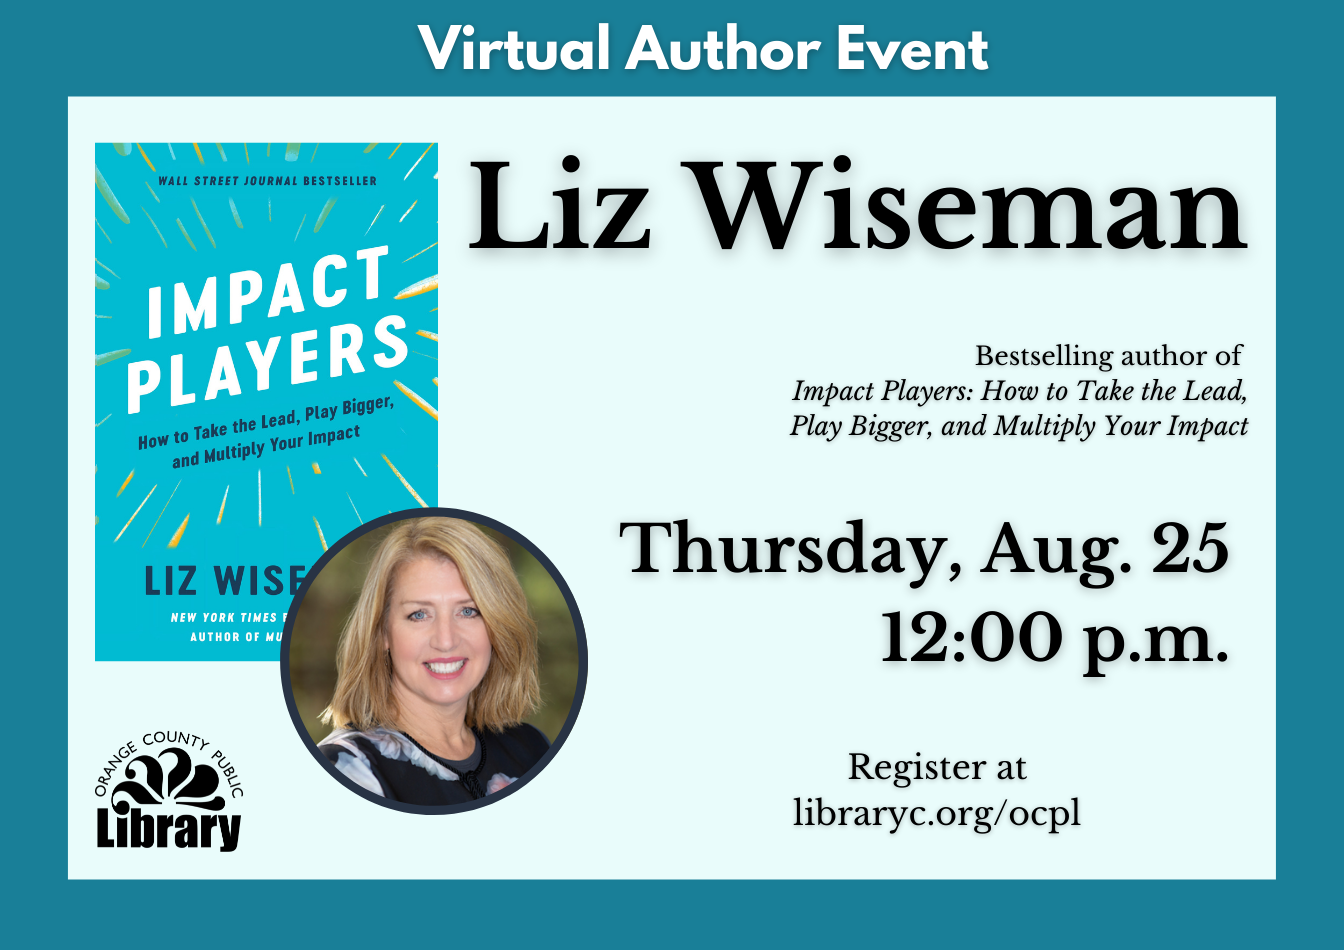 A widget advertising a virtual author event with Liz Wiseman.